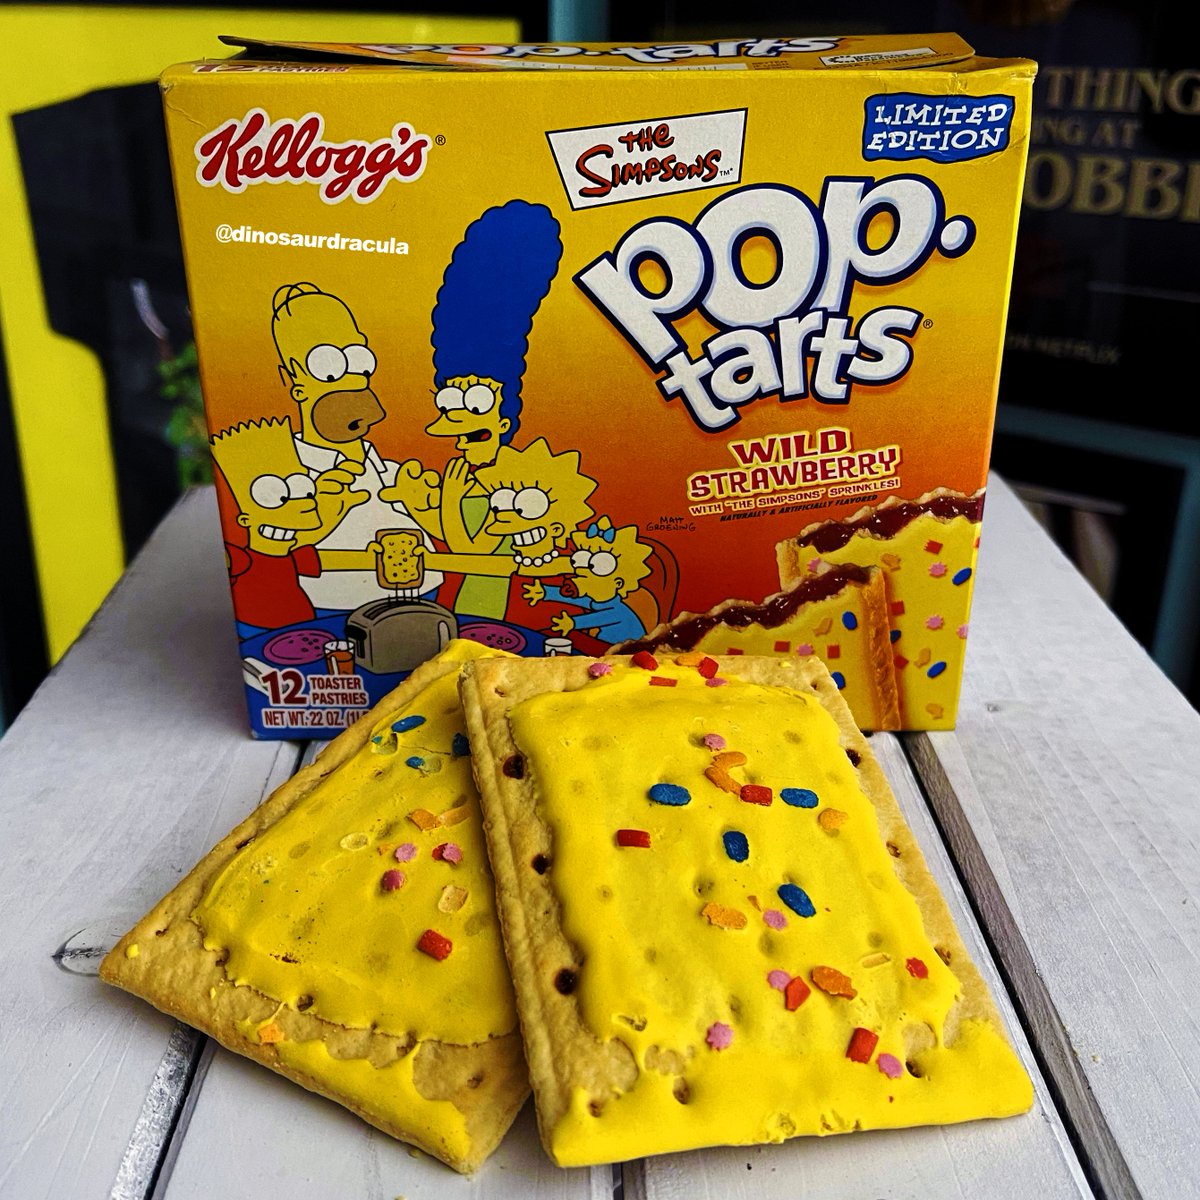 You are looking at 21-year-old Simpsons Pop-Tarts.